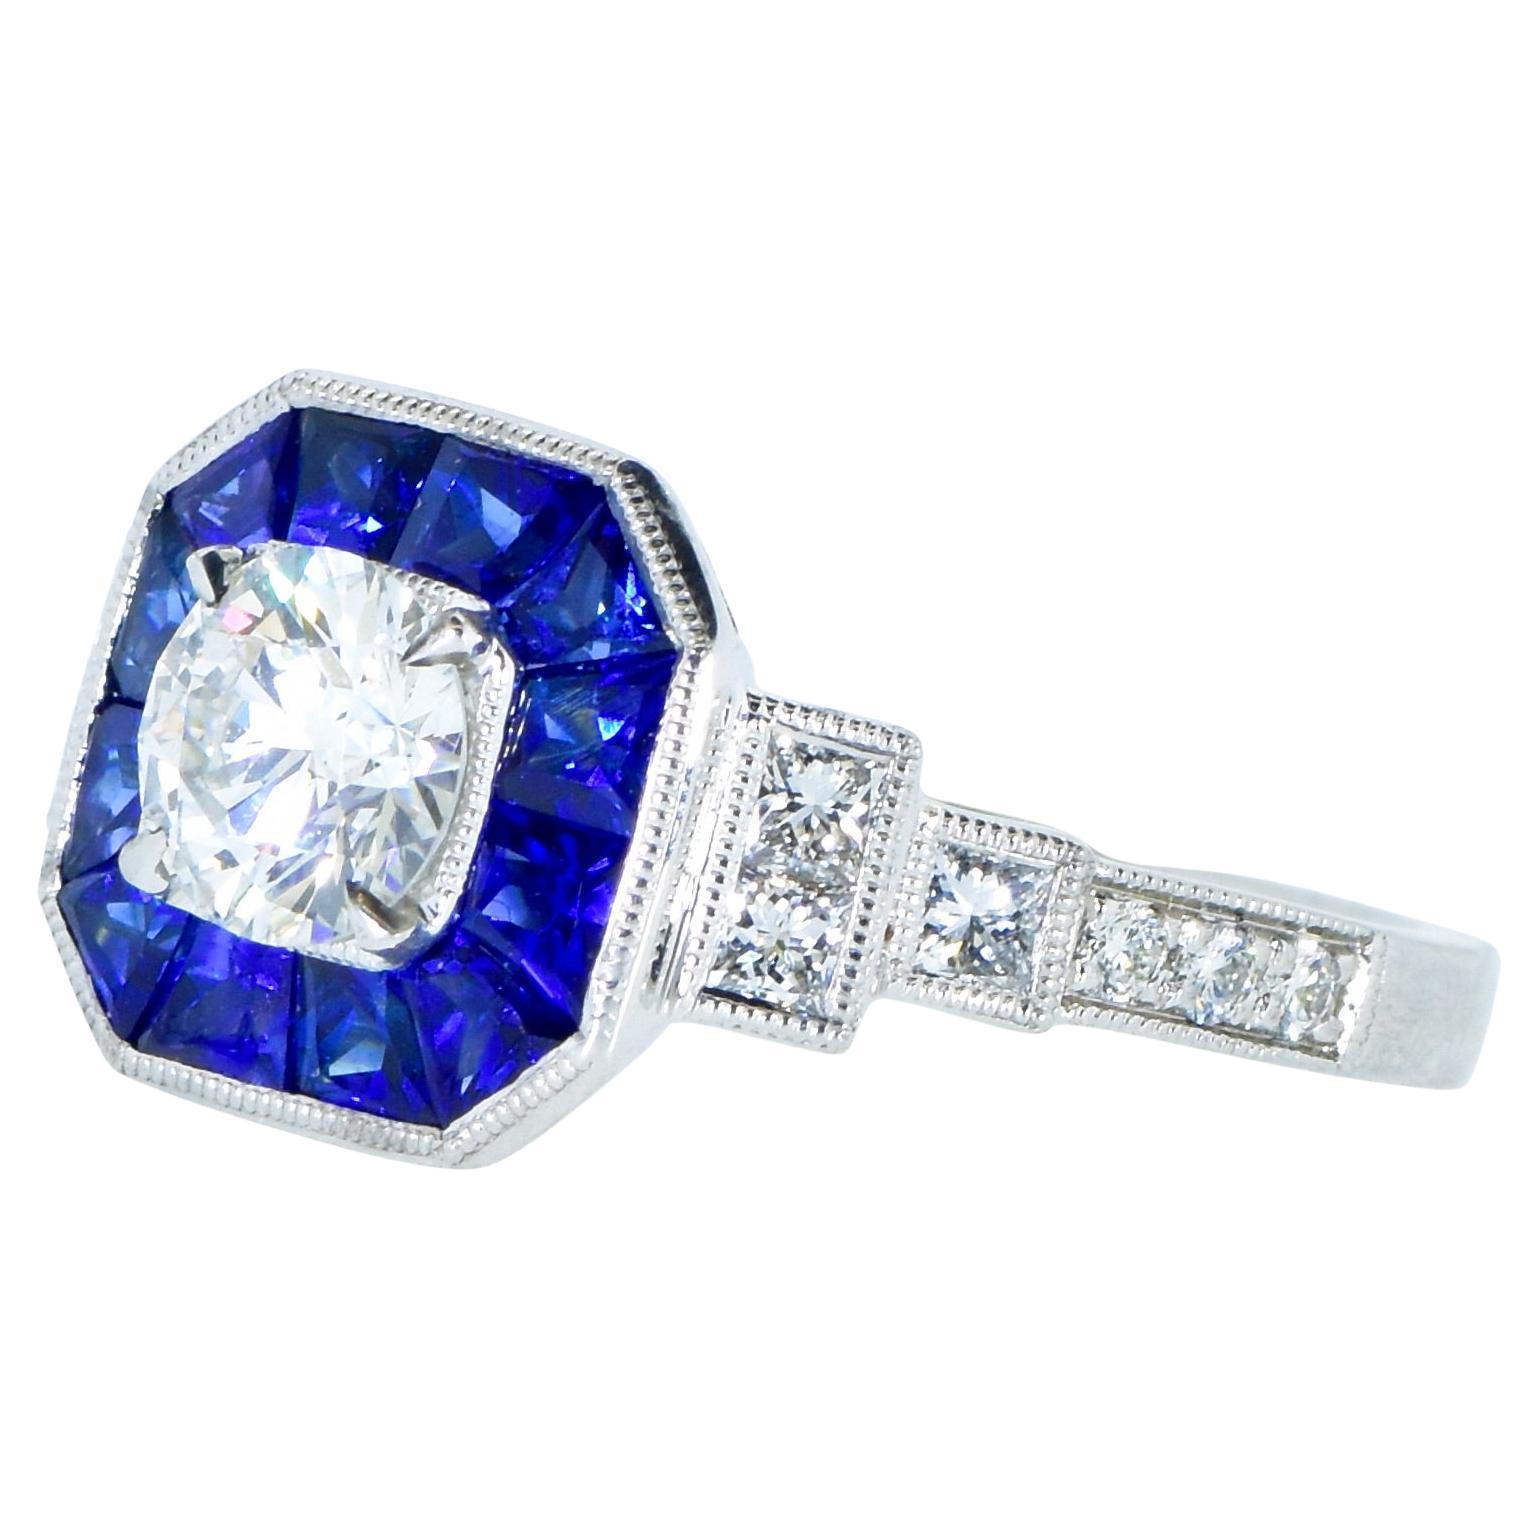 GIA Certified Diamond and Sapphire Fine White Gold Ring